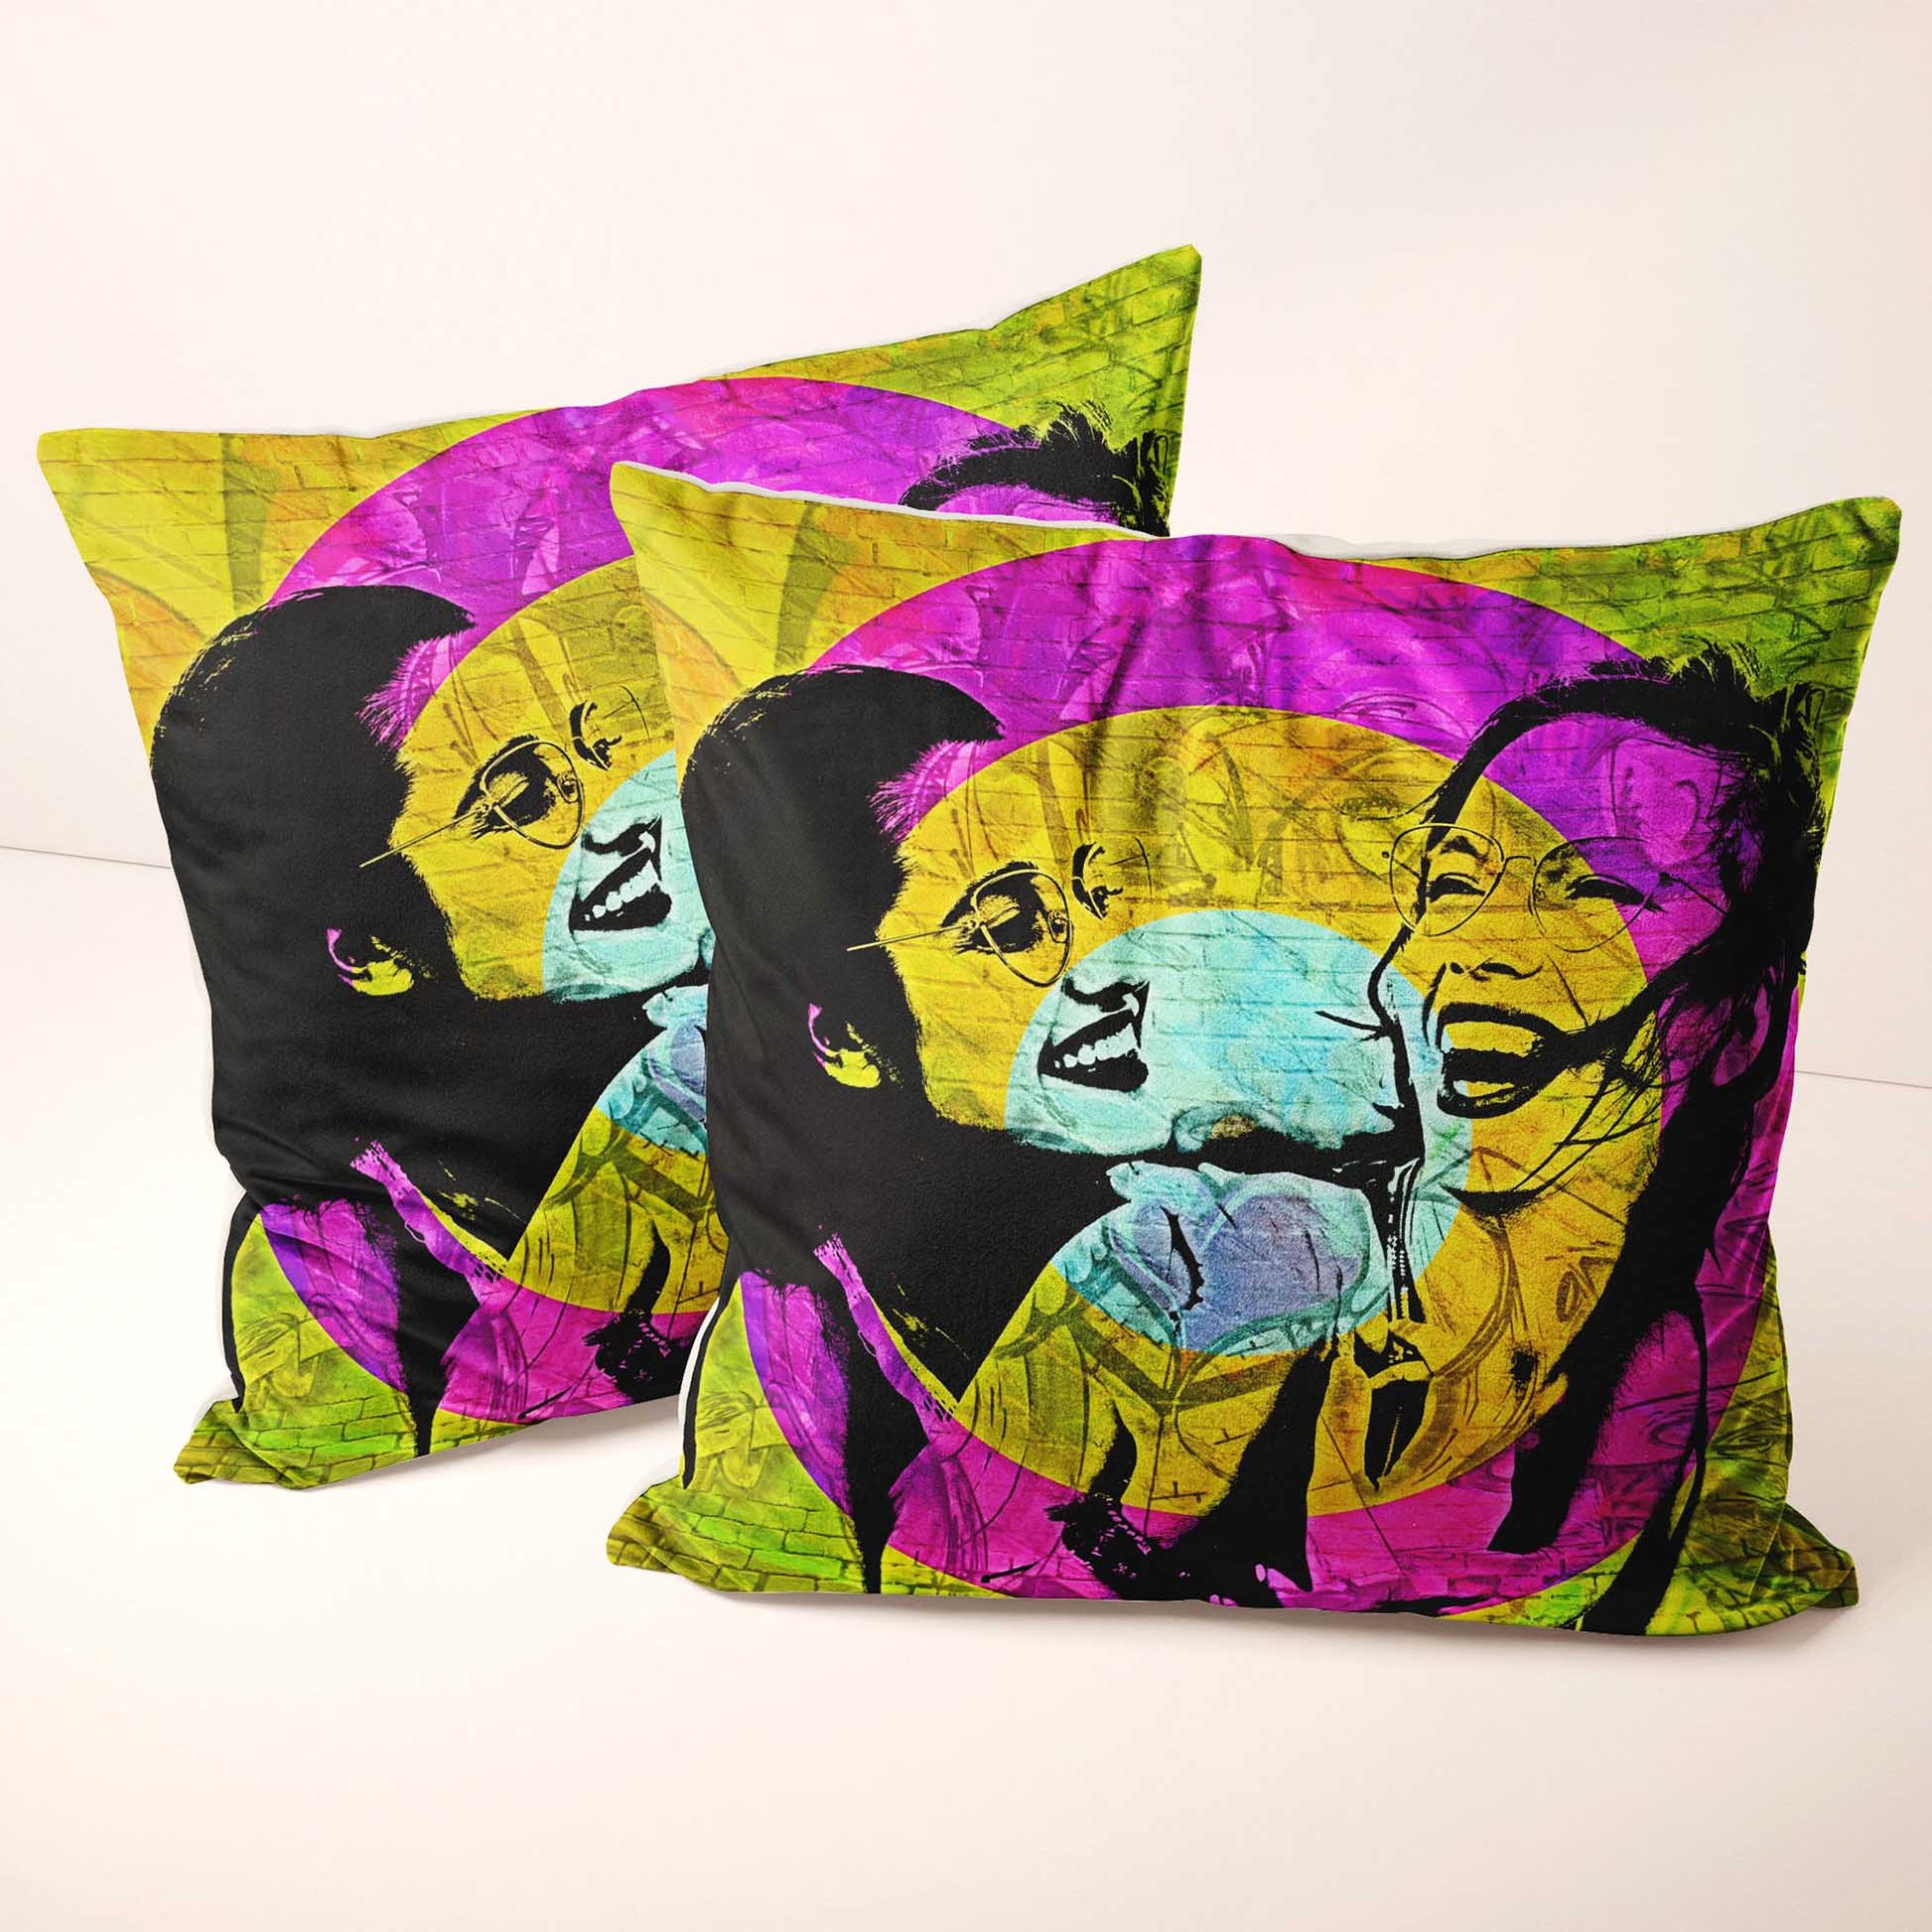 Inject a dose of urban cool into your home with the Personalised Graffiti Street Art Cushion. Its vivid and vibrant print, derived from your photo, brings the energy and creativity of street art to your interior